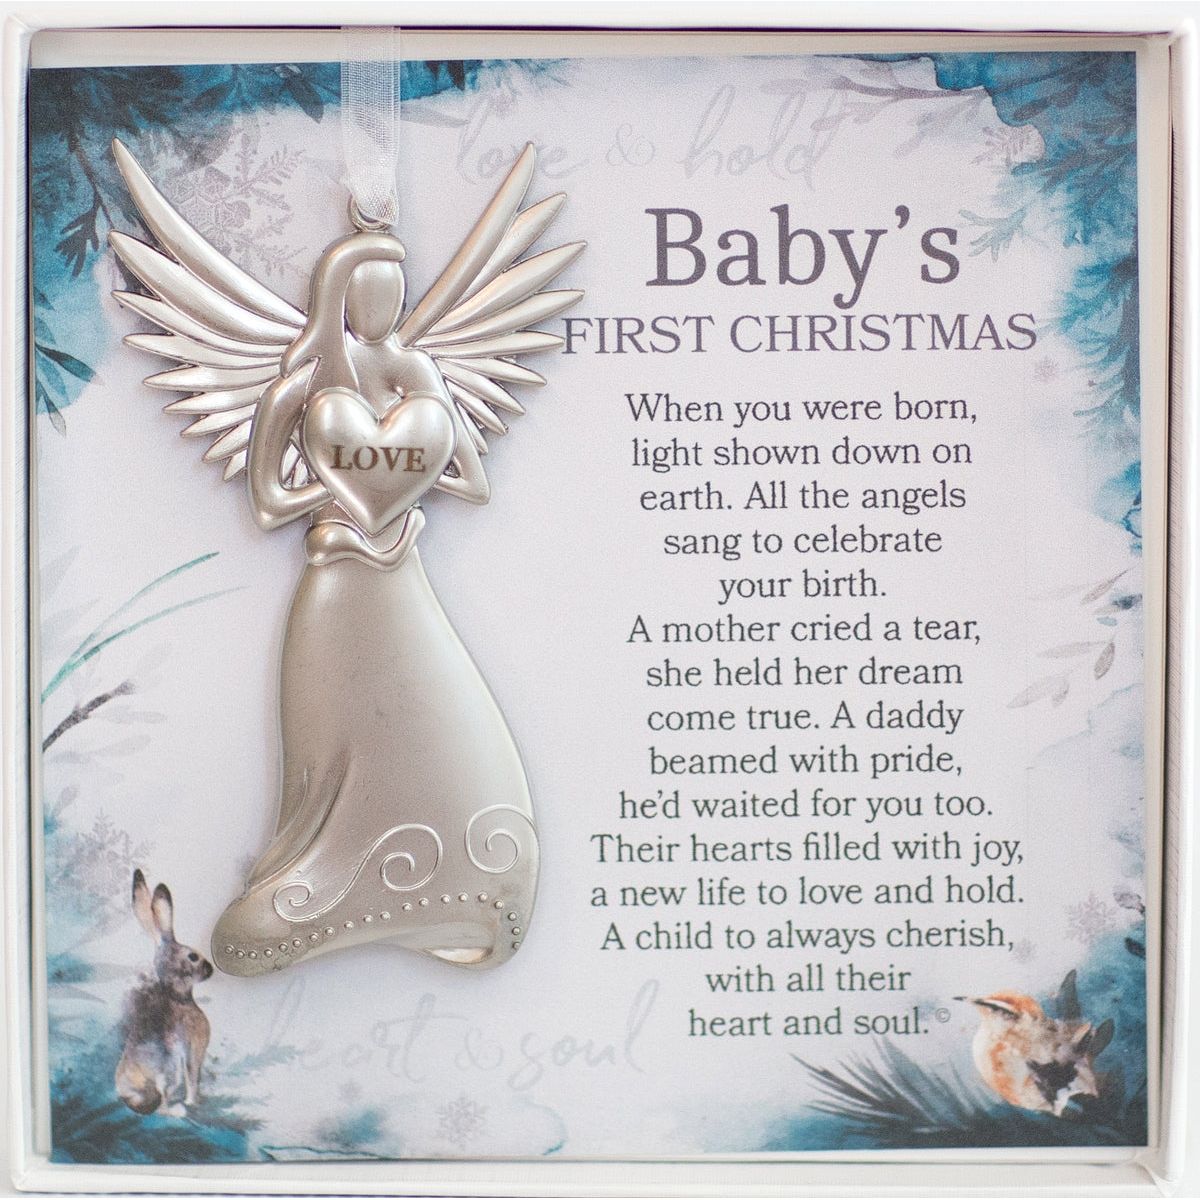 Baby's First Christmas metal angel ornament with sentiment card in white box with clear lid.